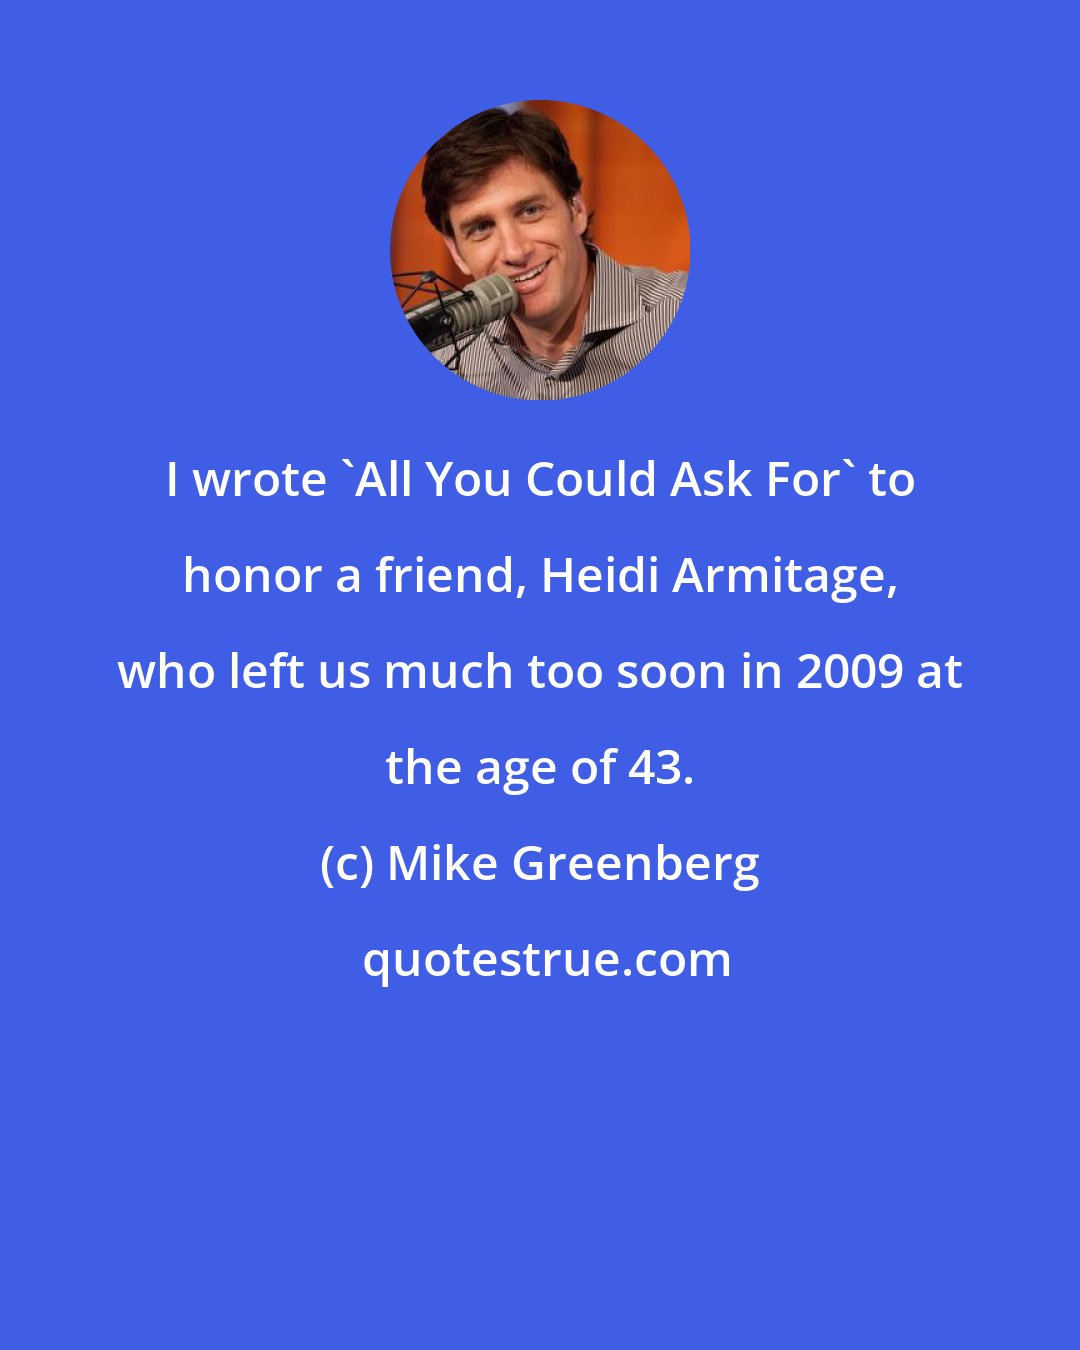 Mike Greenberg: I wrote 'All You Could Ask For' to honor a friend, Heidi Armitage, who left us much too soon in 2009 at the age of 43.